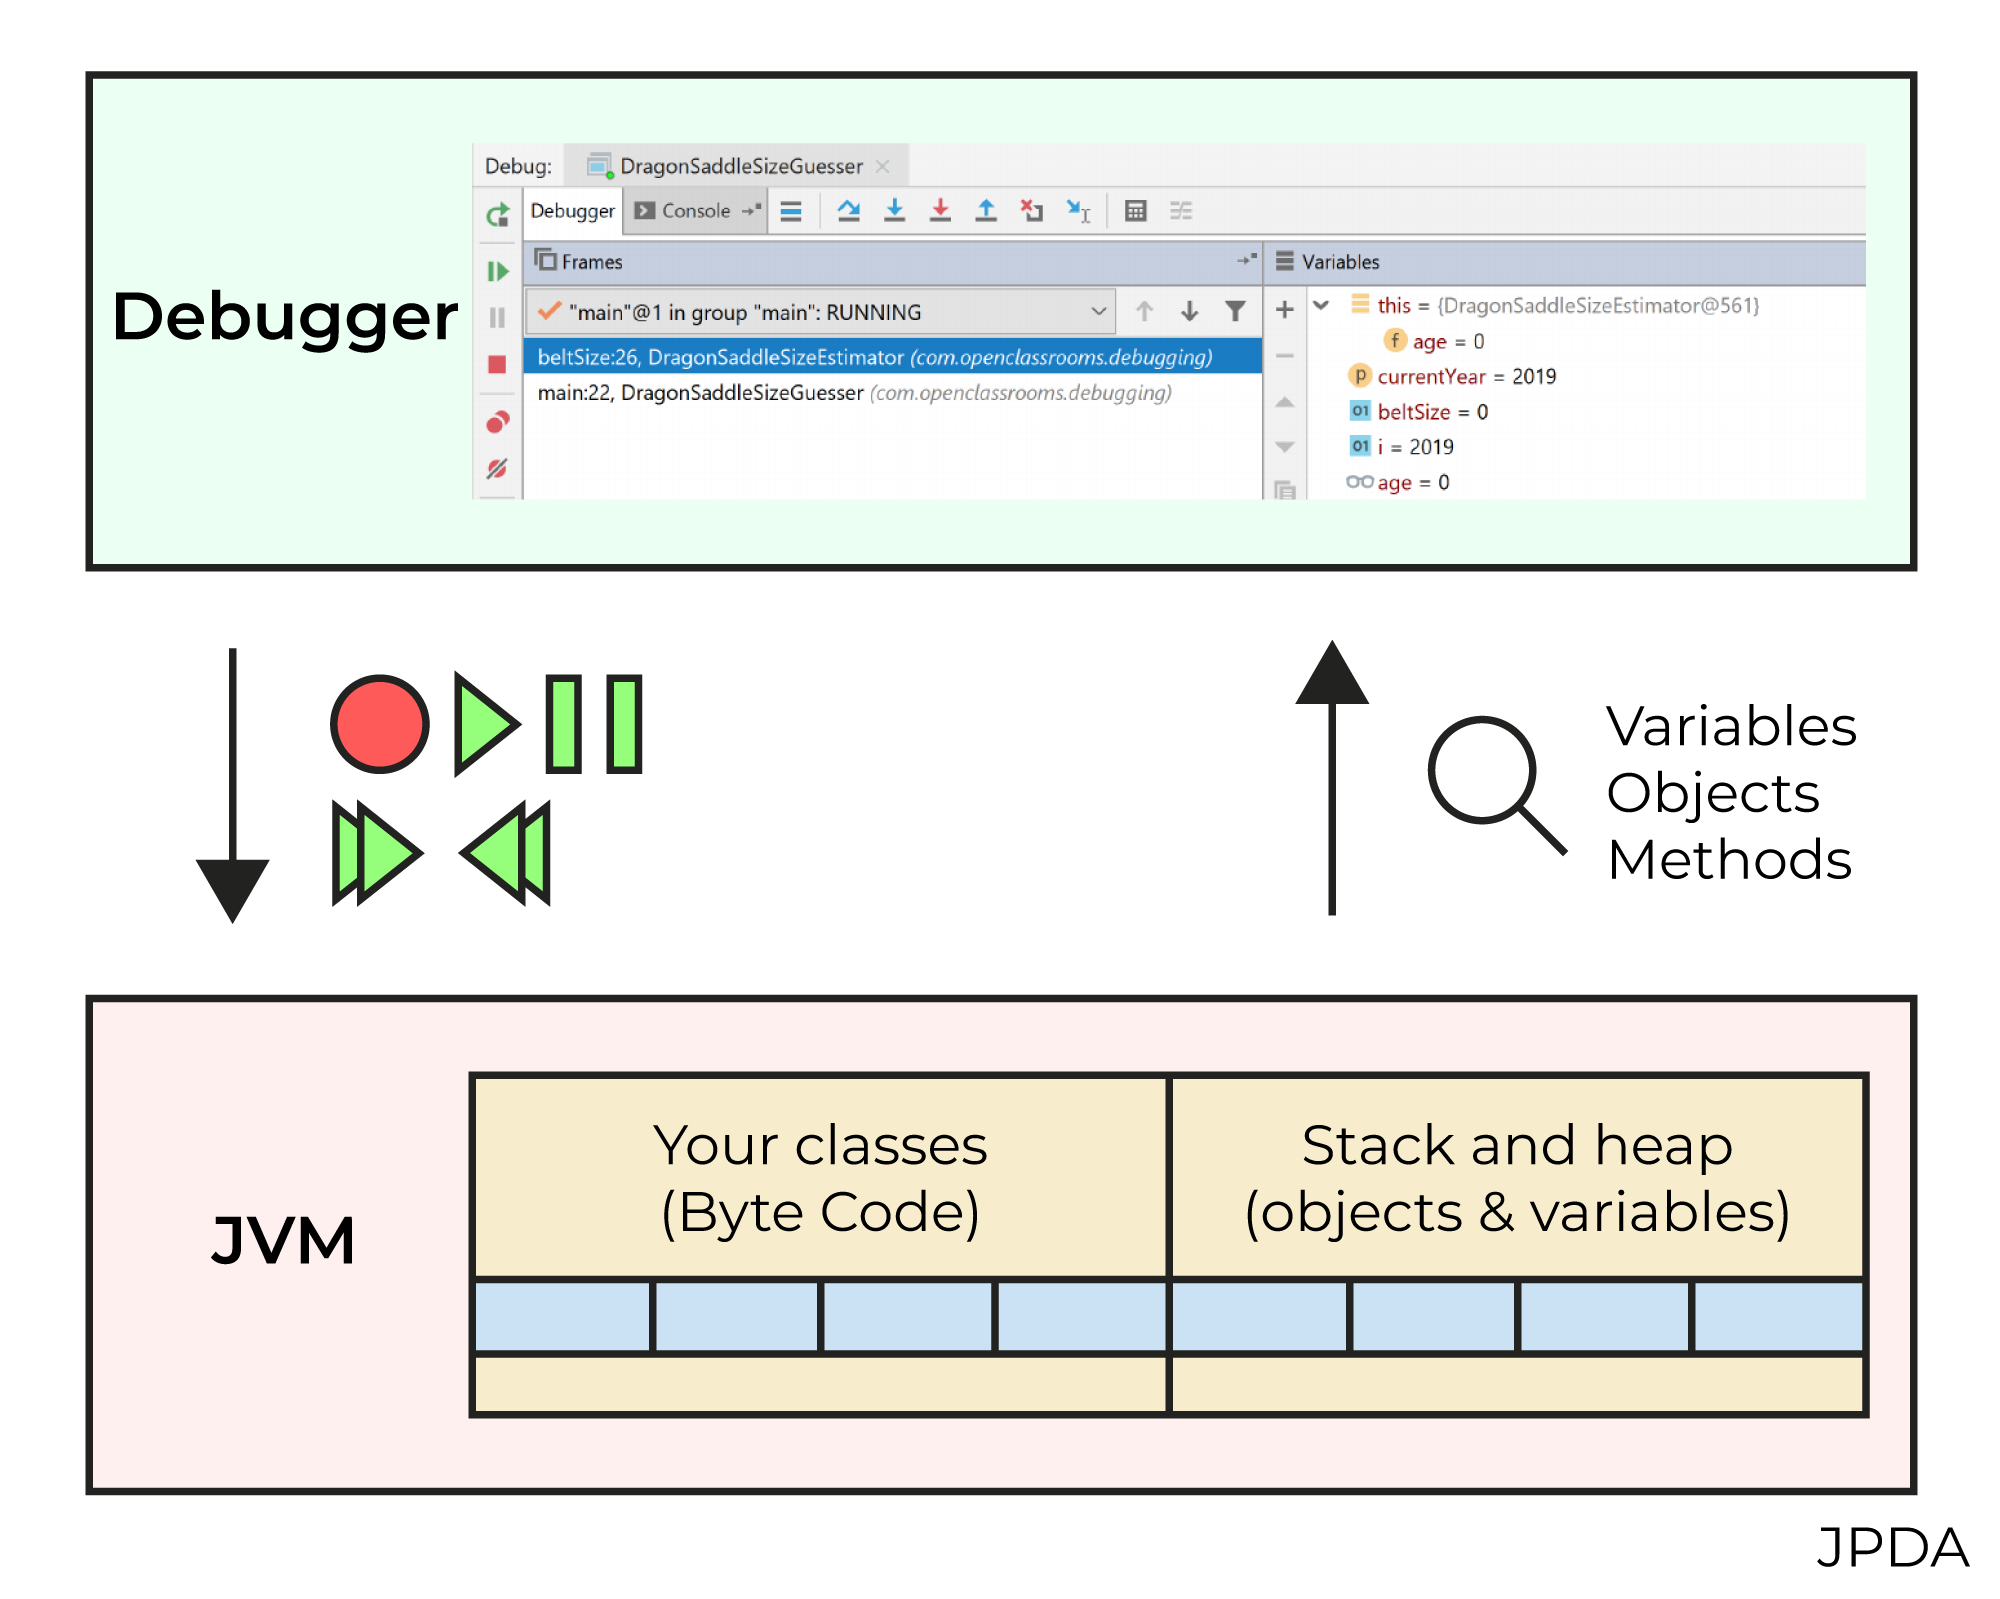 JPDA provides a means of remote controlling your JVM with a debugger.